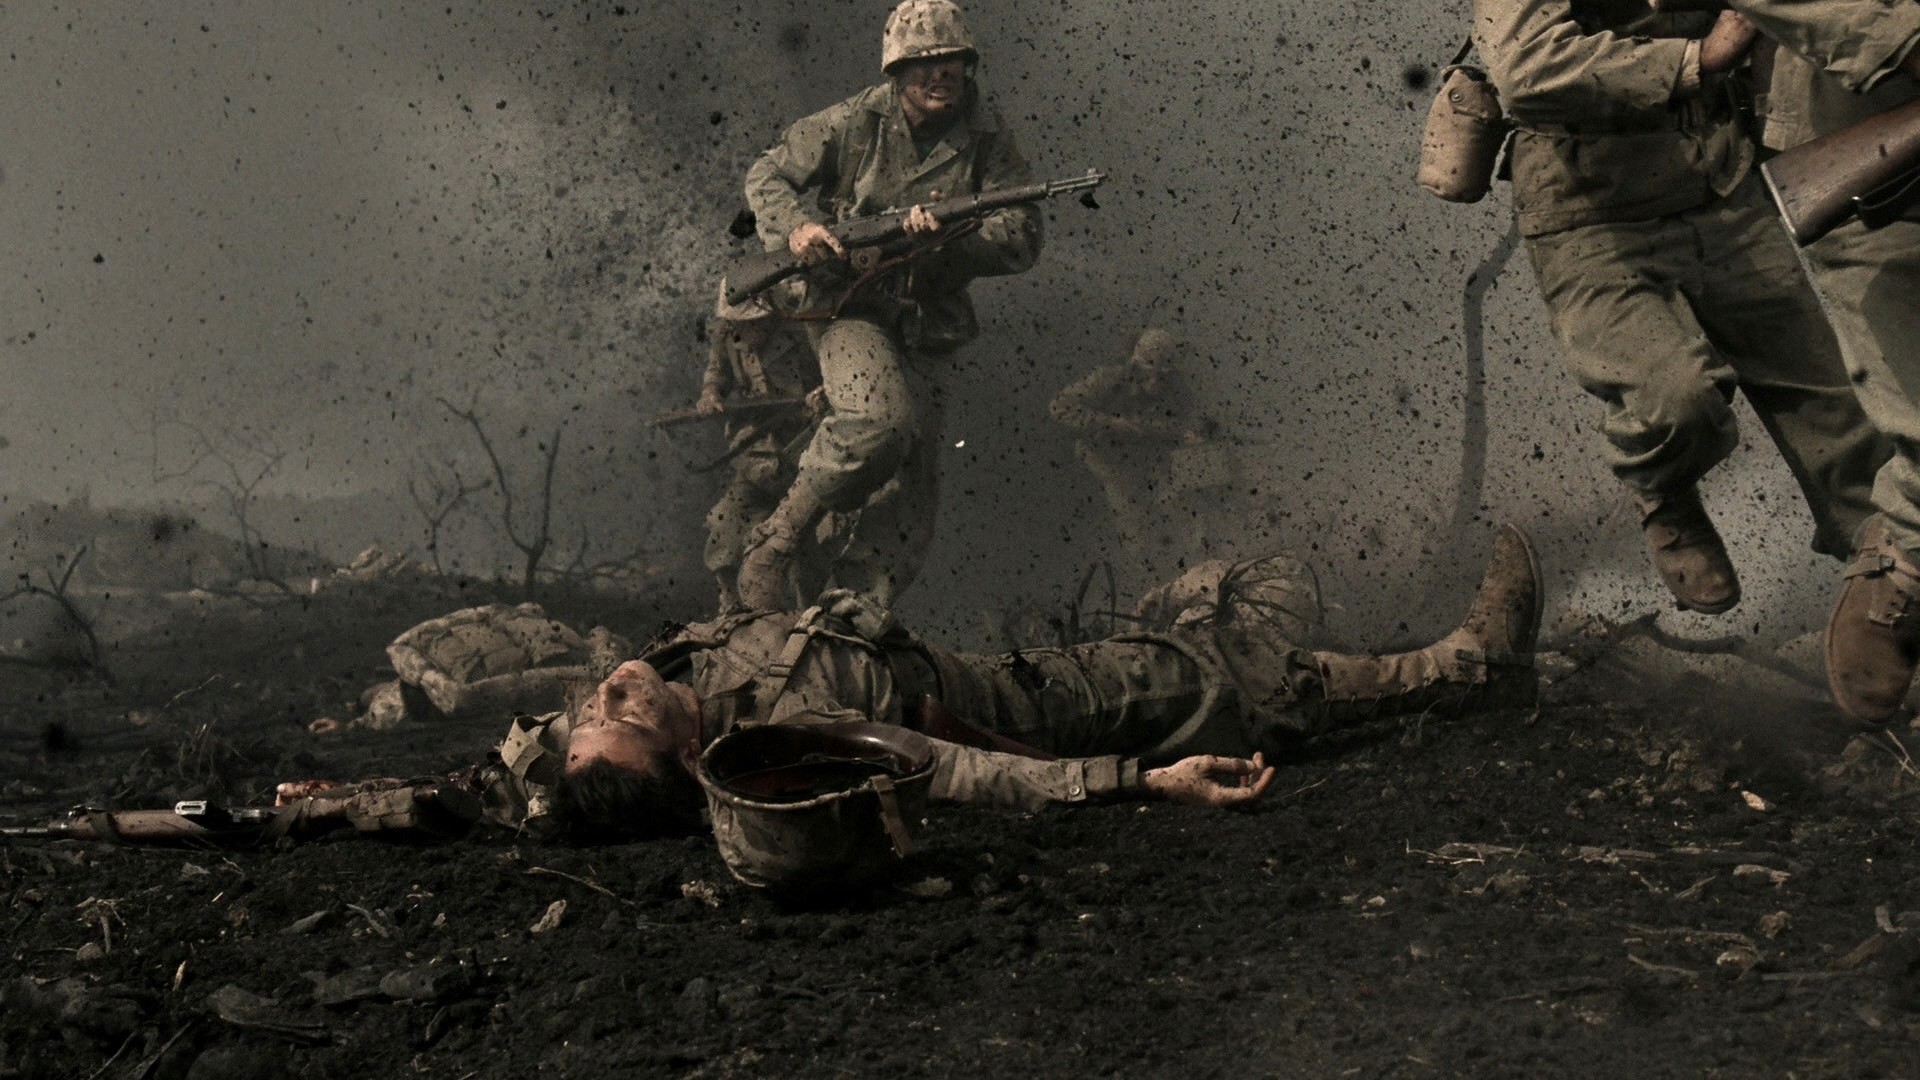 HD band of brothers wallpapers  Peakpx